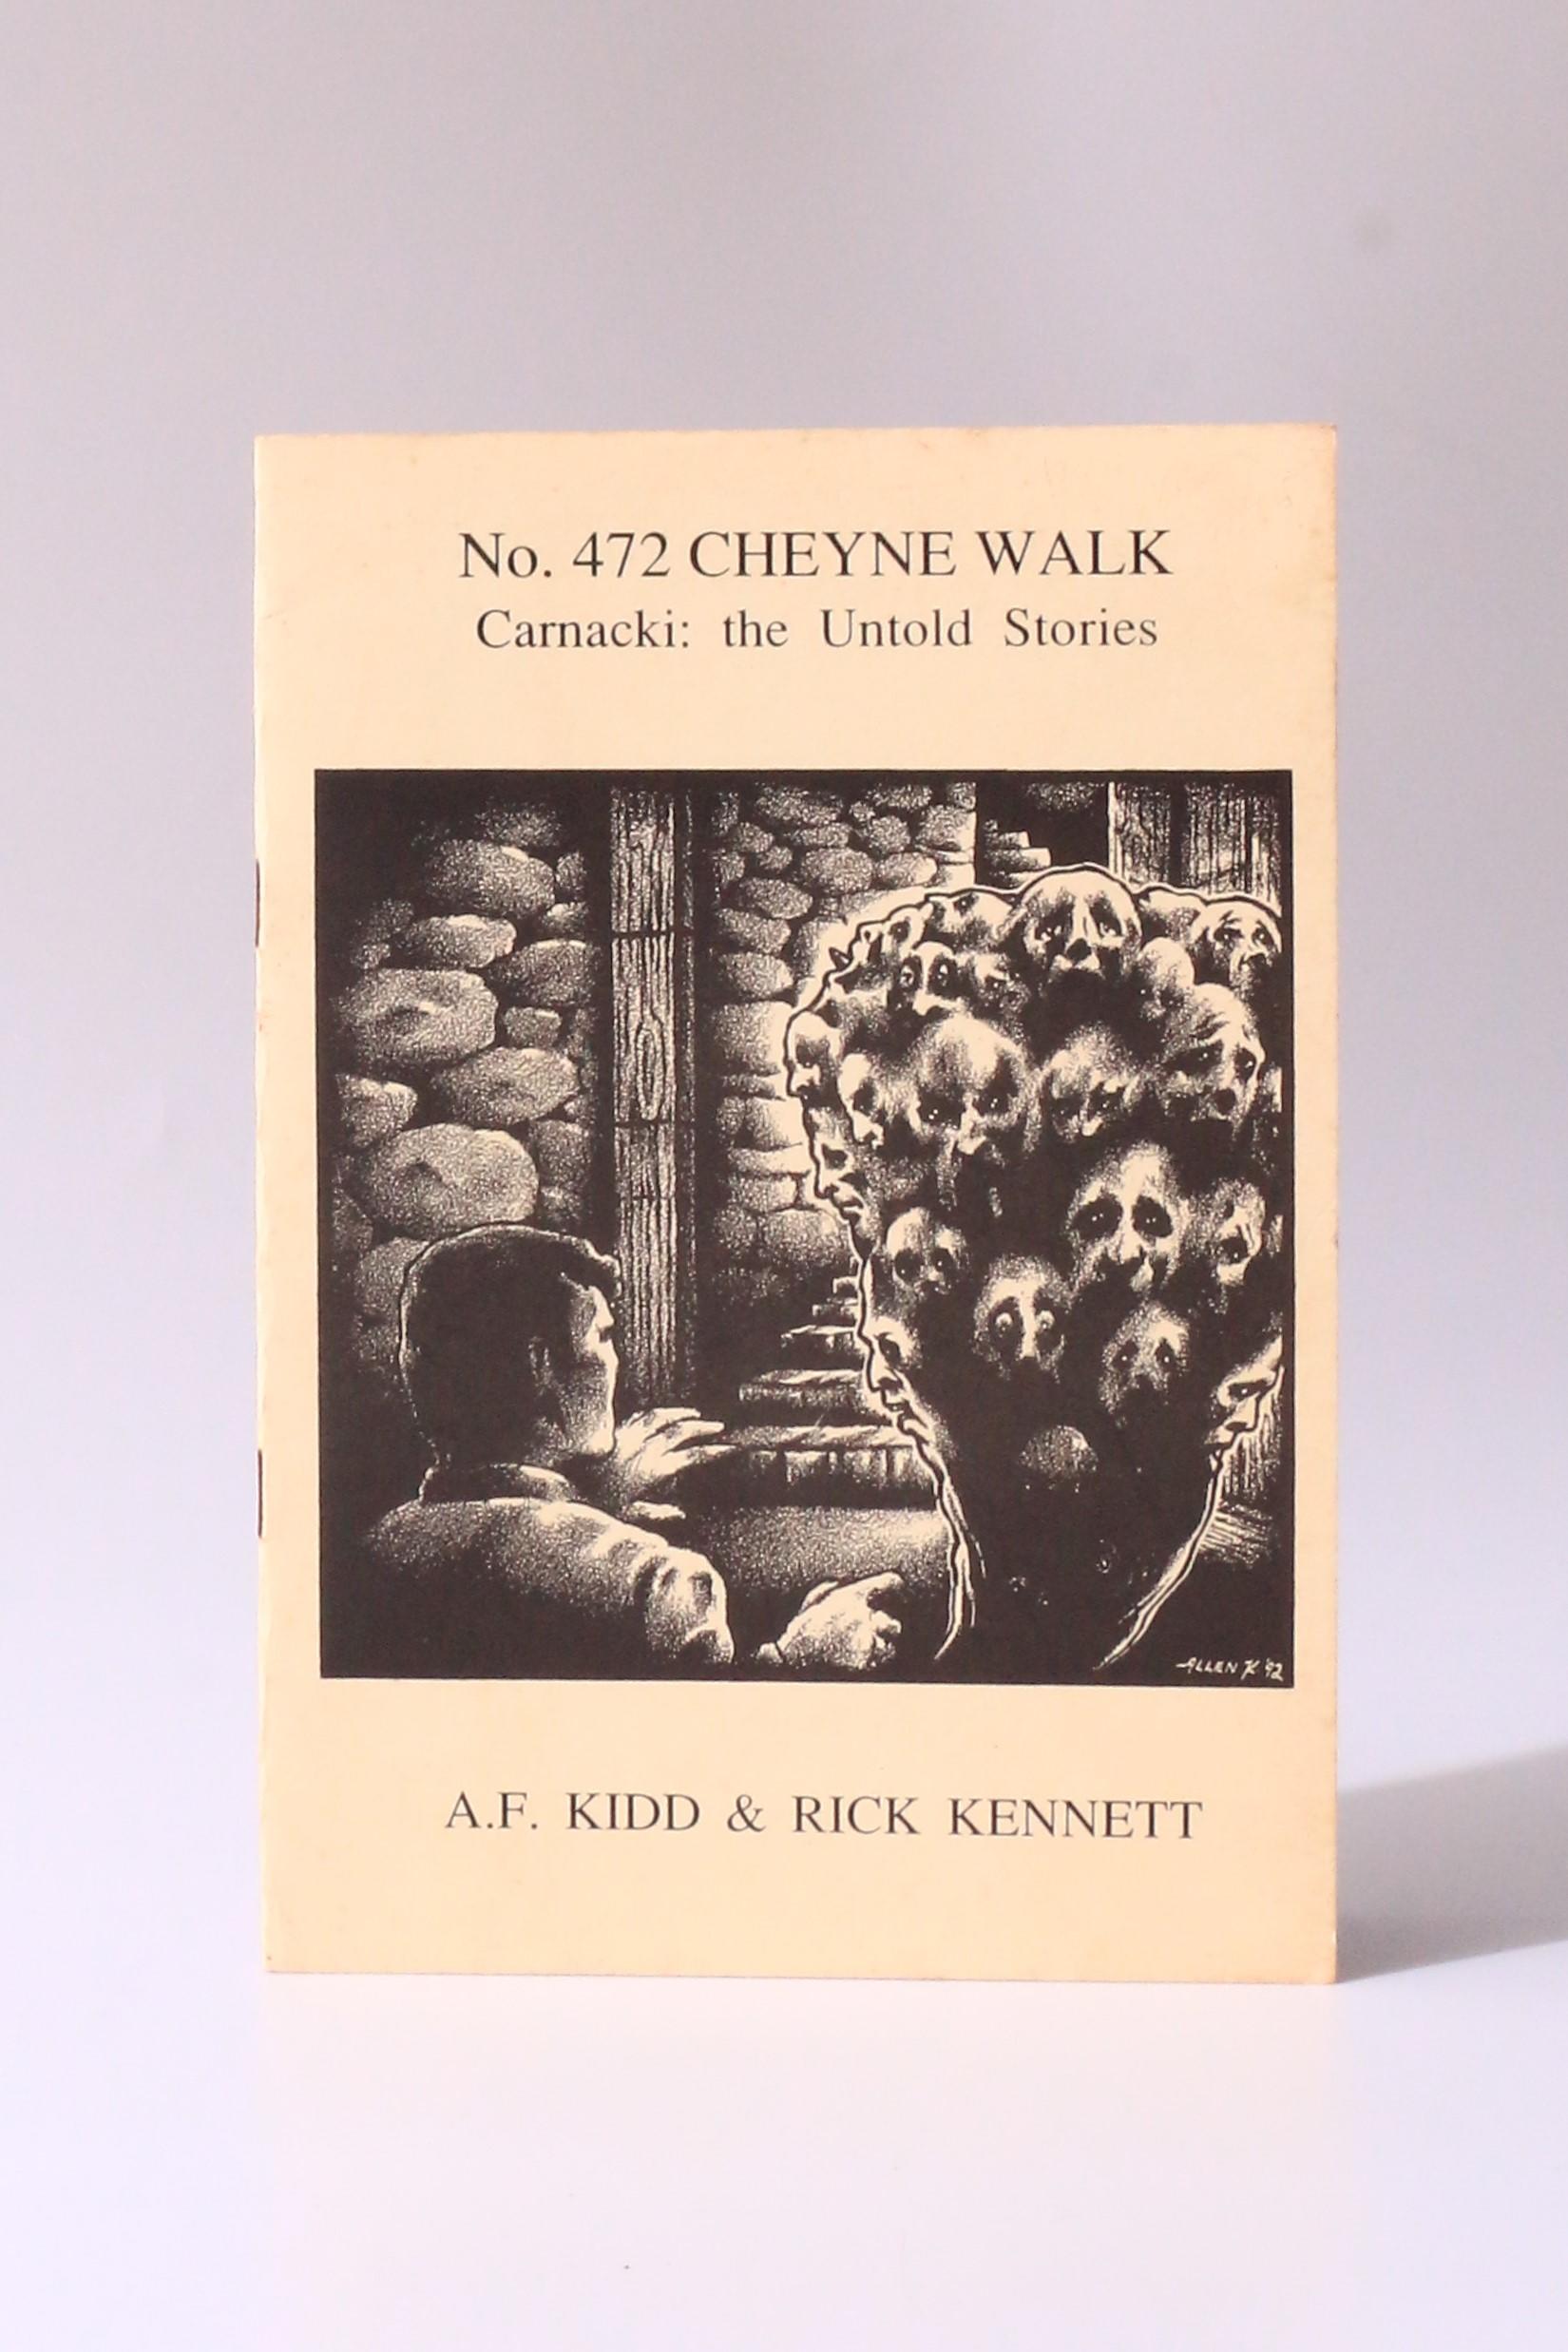 A.F. Kidd & Rick Kennett - No. 472 Cheyne Walk. Carnacki: the Untold Stories - The Ghost Story Society, 1992, First Edition.